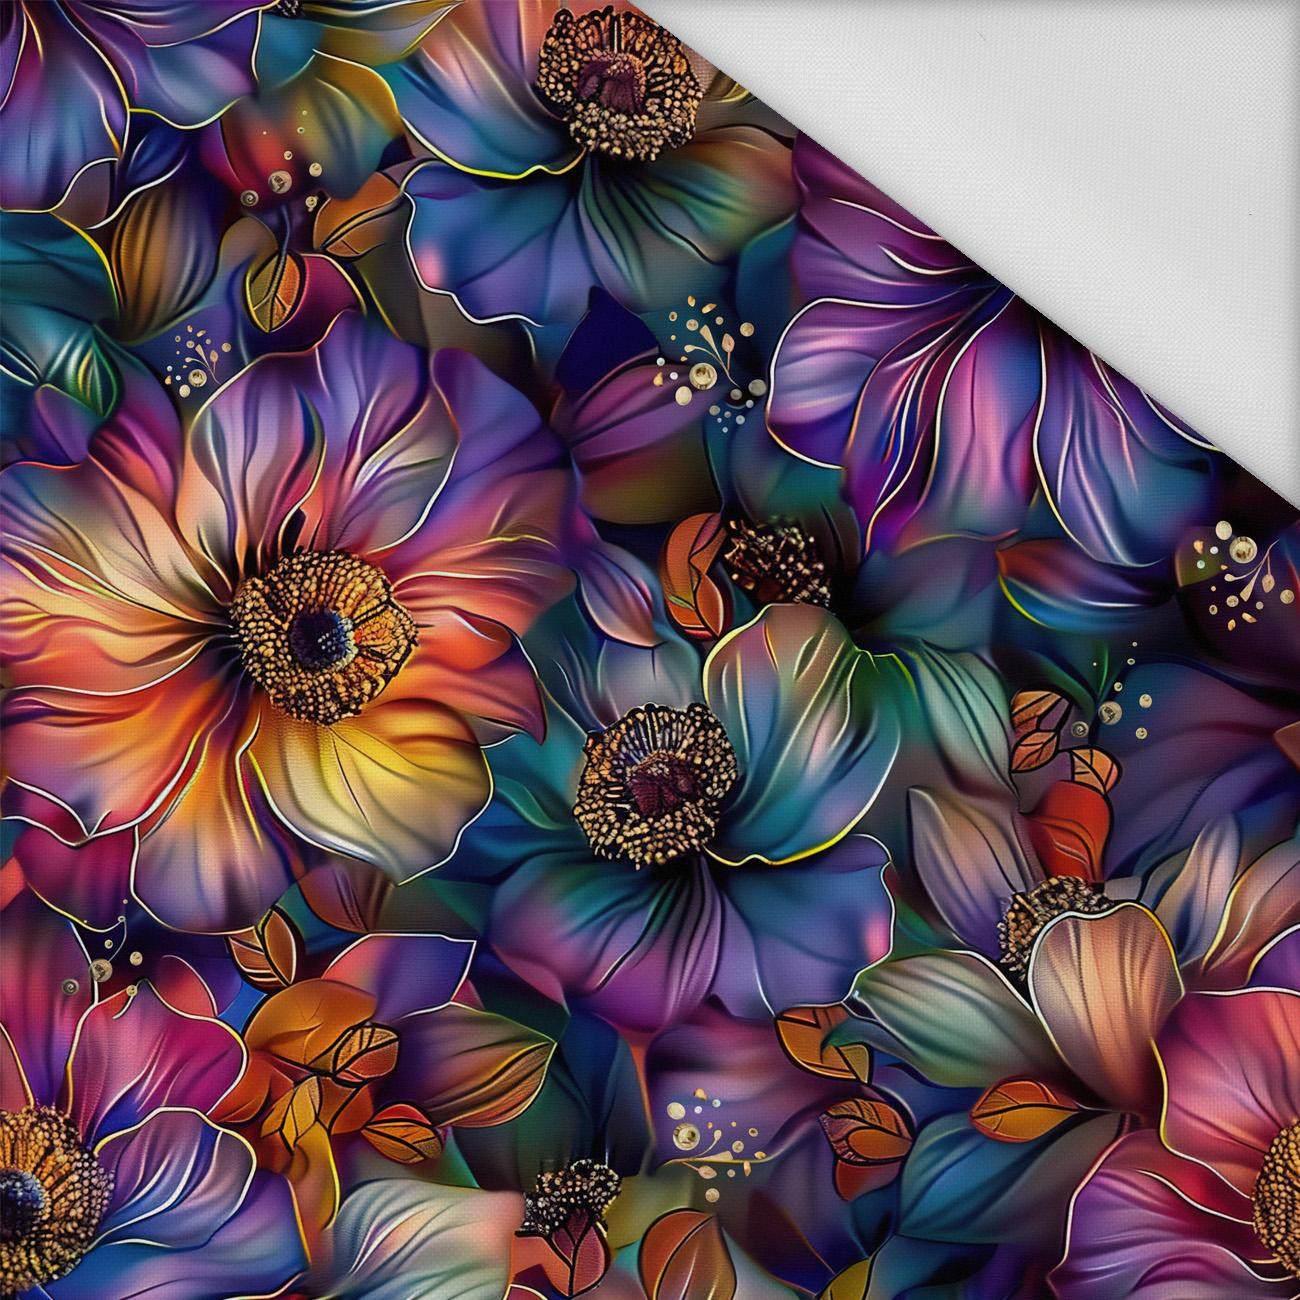 COLORFUL FLOWERS pat. 1 - Waterproof woven fabric